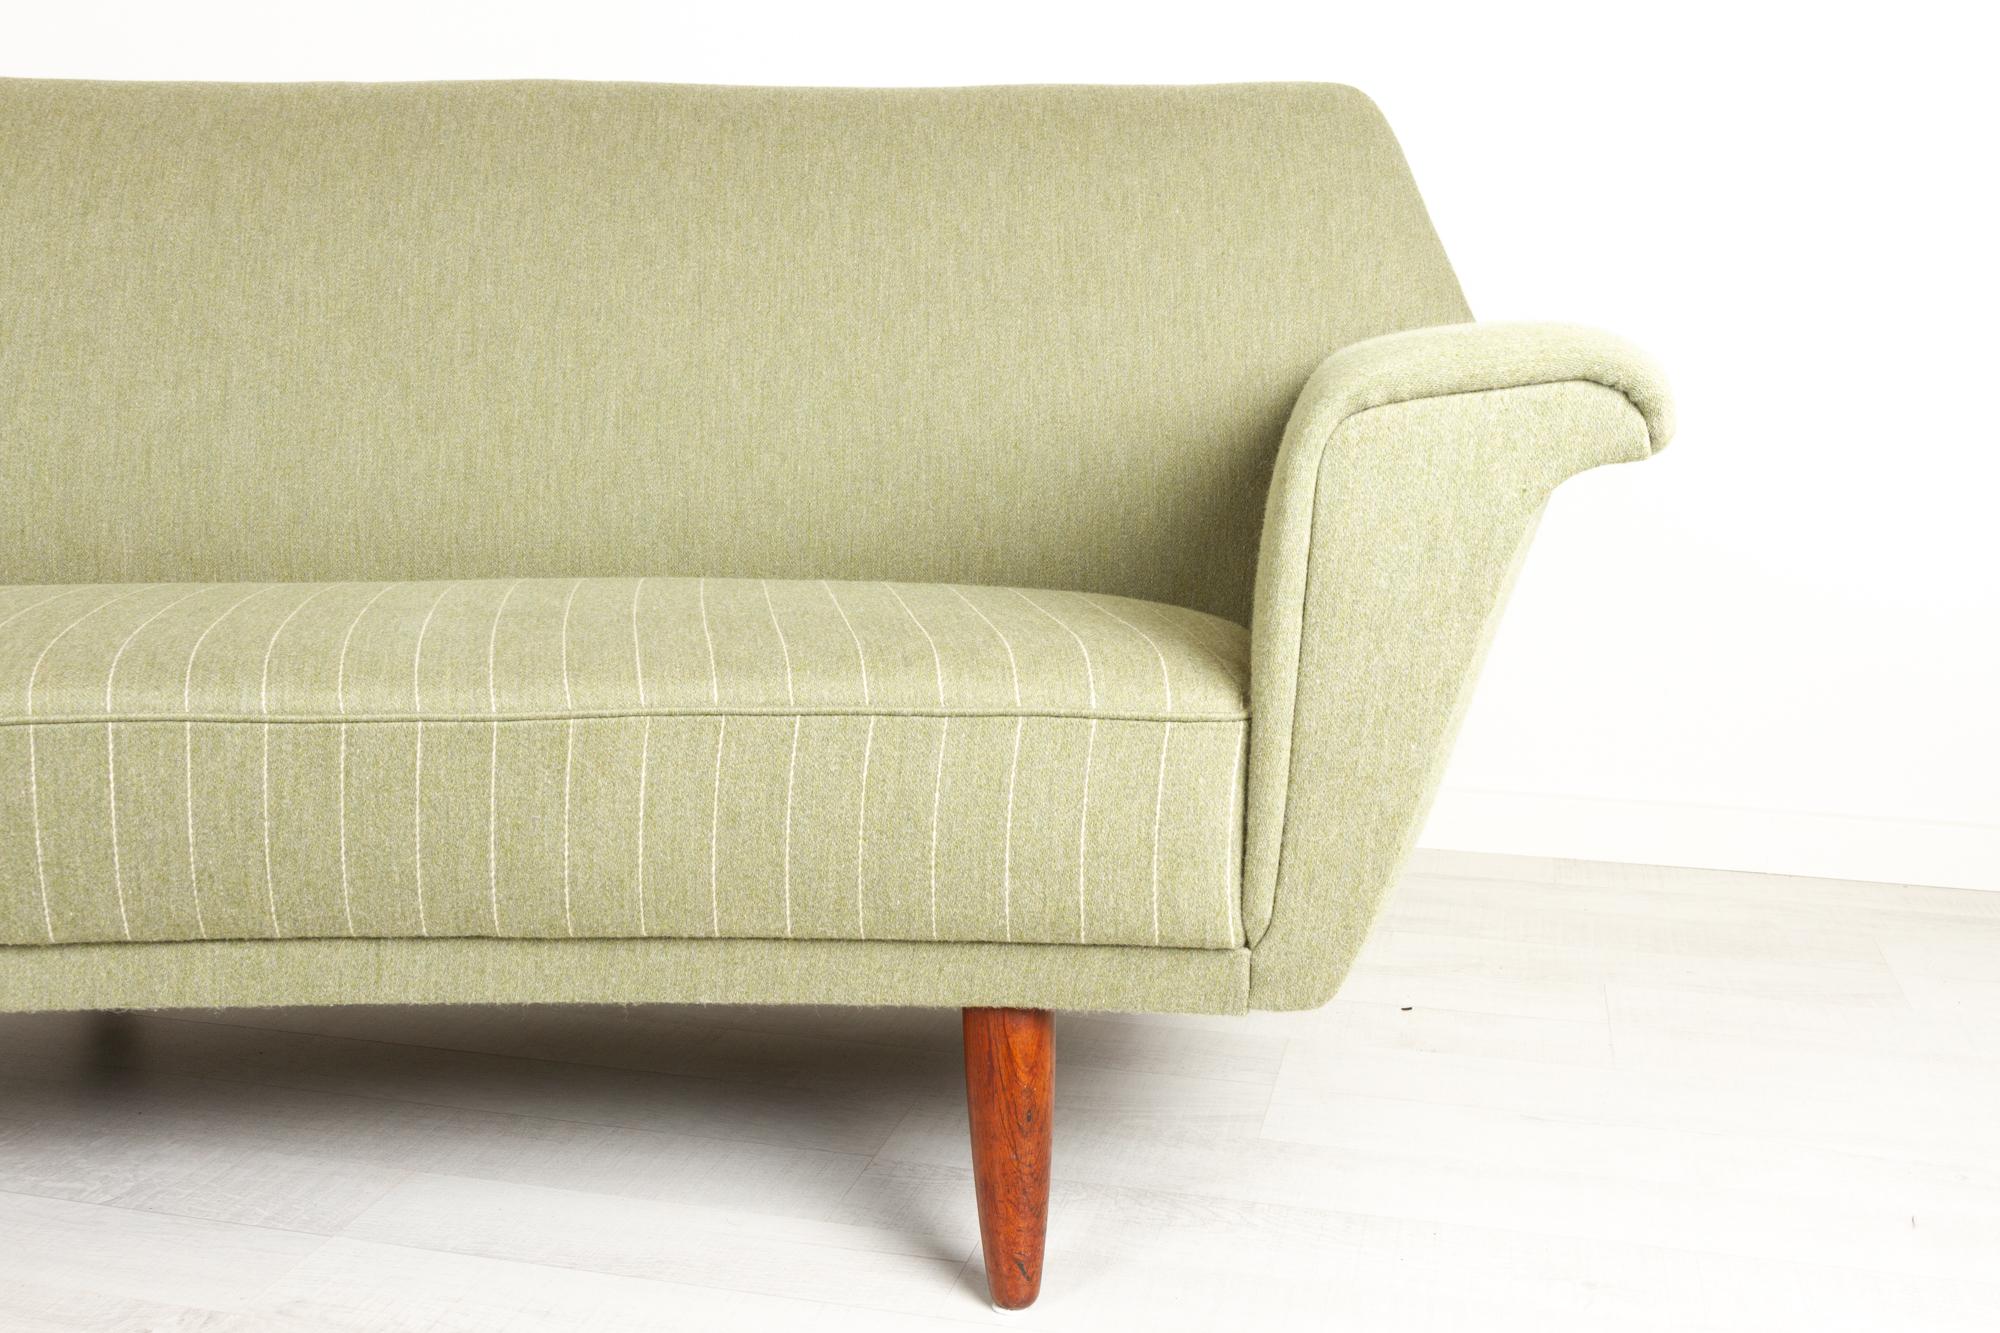 Mid-20th Century Vintage Danish Curved Sofa by G. Thams for Vejen Polstermøbelfabrik, 1960s